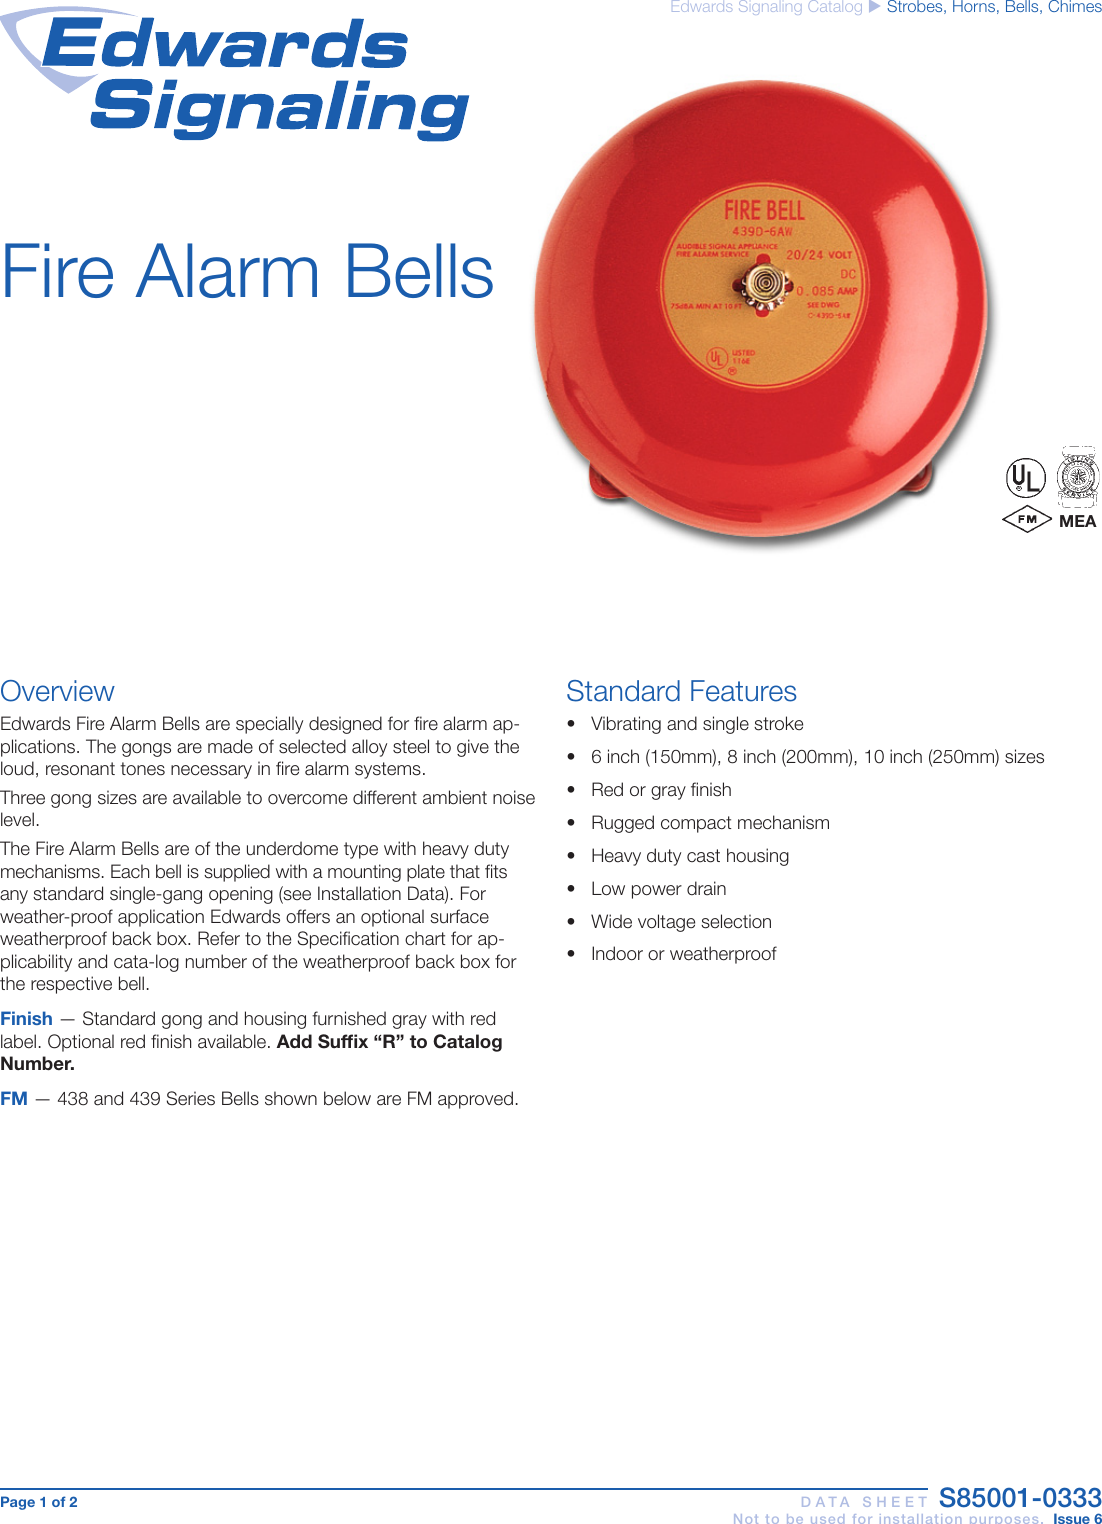 Page 1 of 2 - Data Sheet S85001-0333 -- Fire Alarm Bells